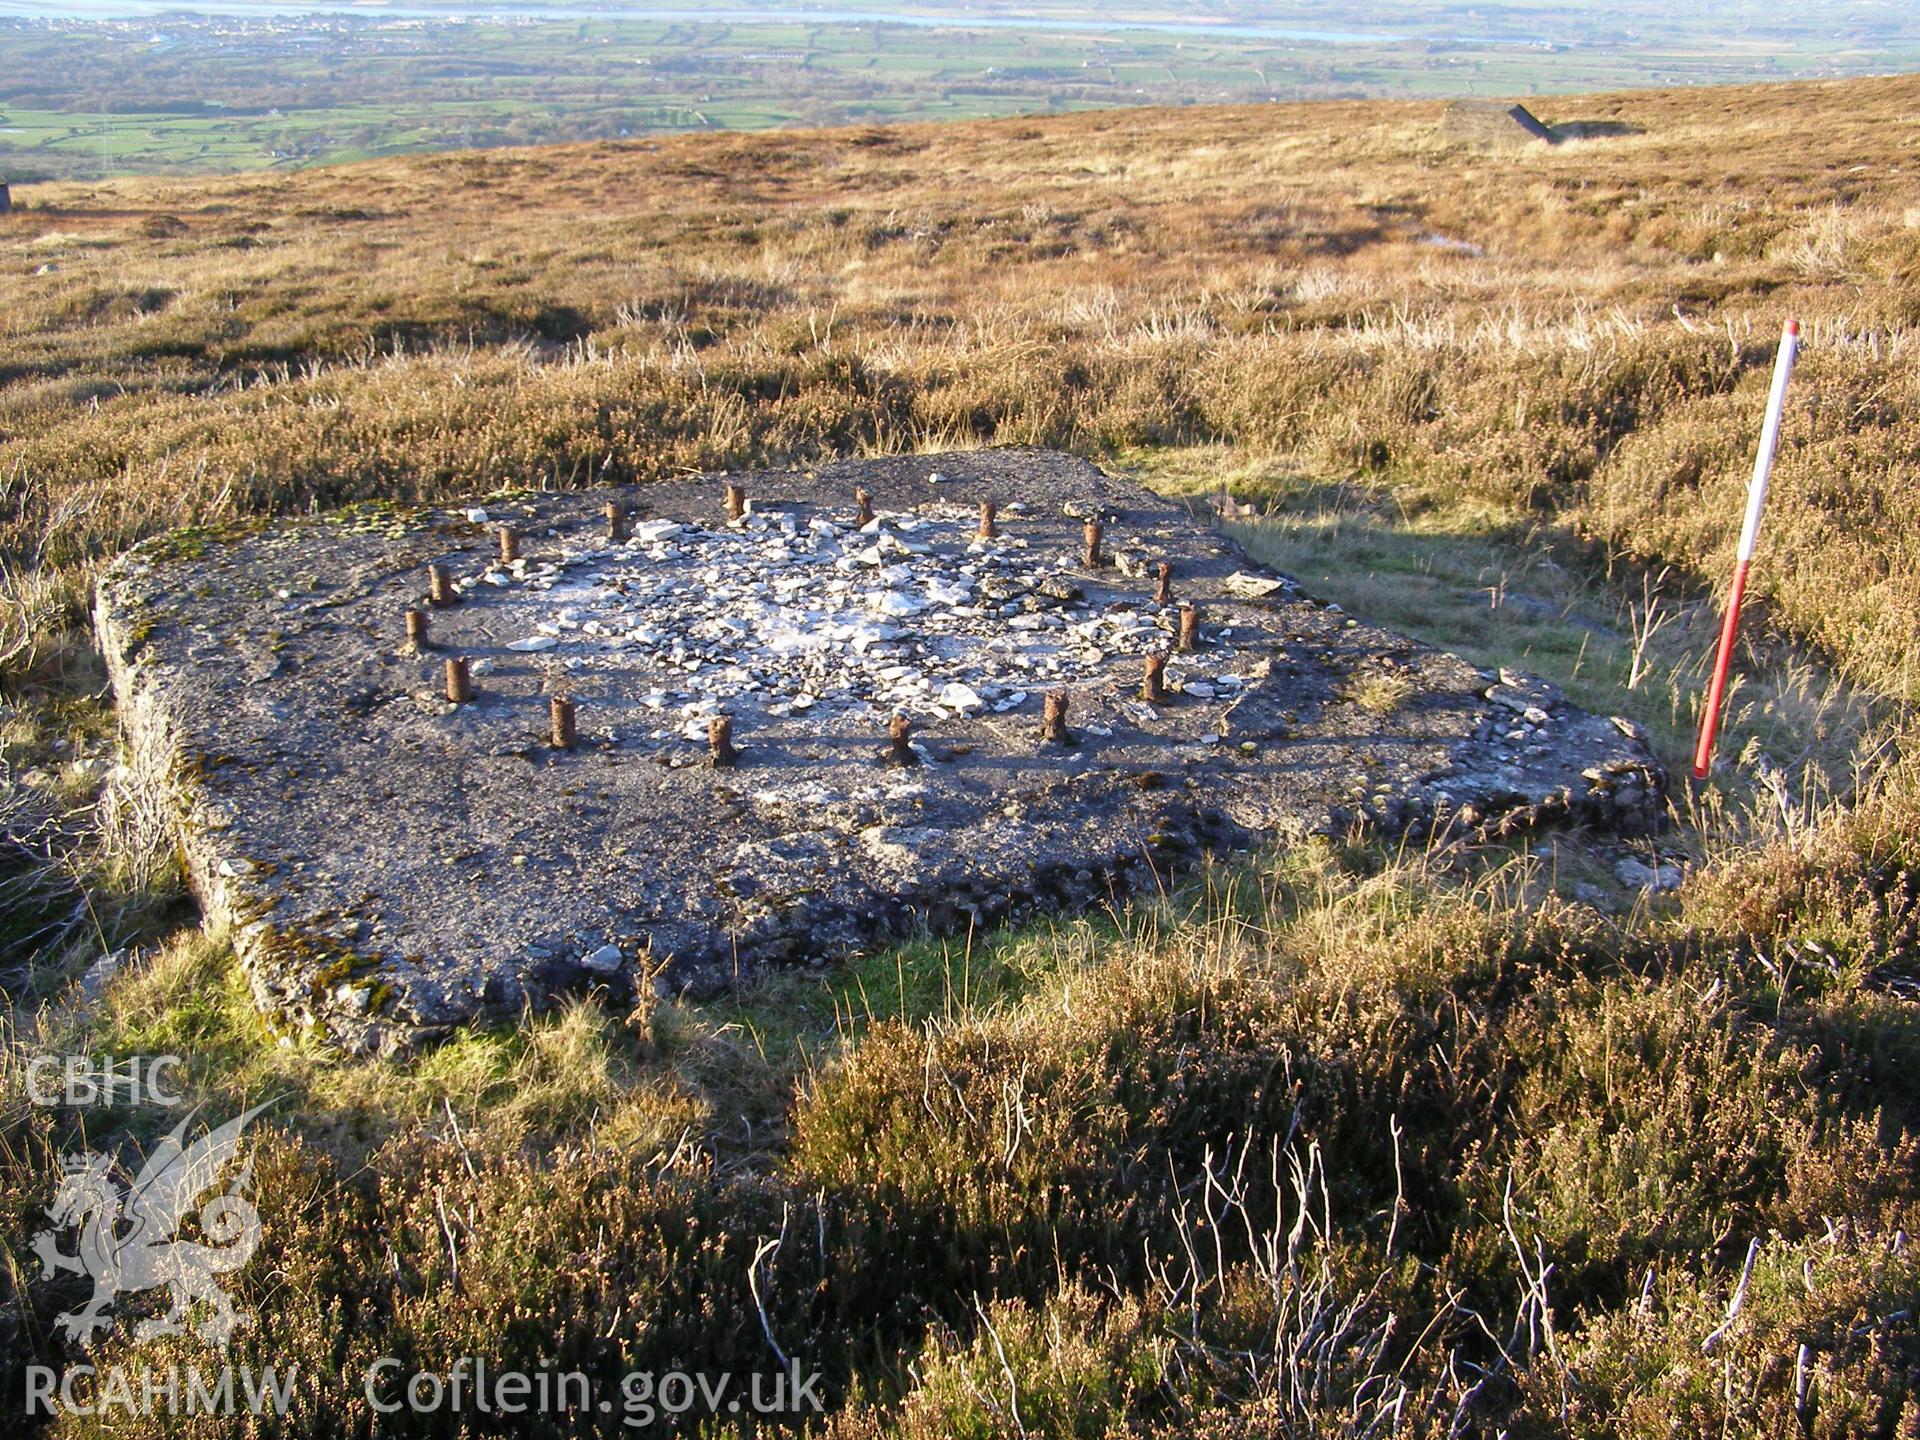 Digital colour photograph of Cefn Du Radio Station, concrete base XLV taken on 10/12/2007 by P.J. Schofield during the Snowdon North West Upland Survey undertaken by Oxford Archaeology North.